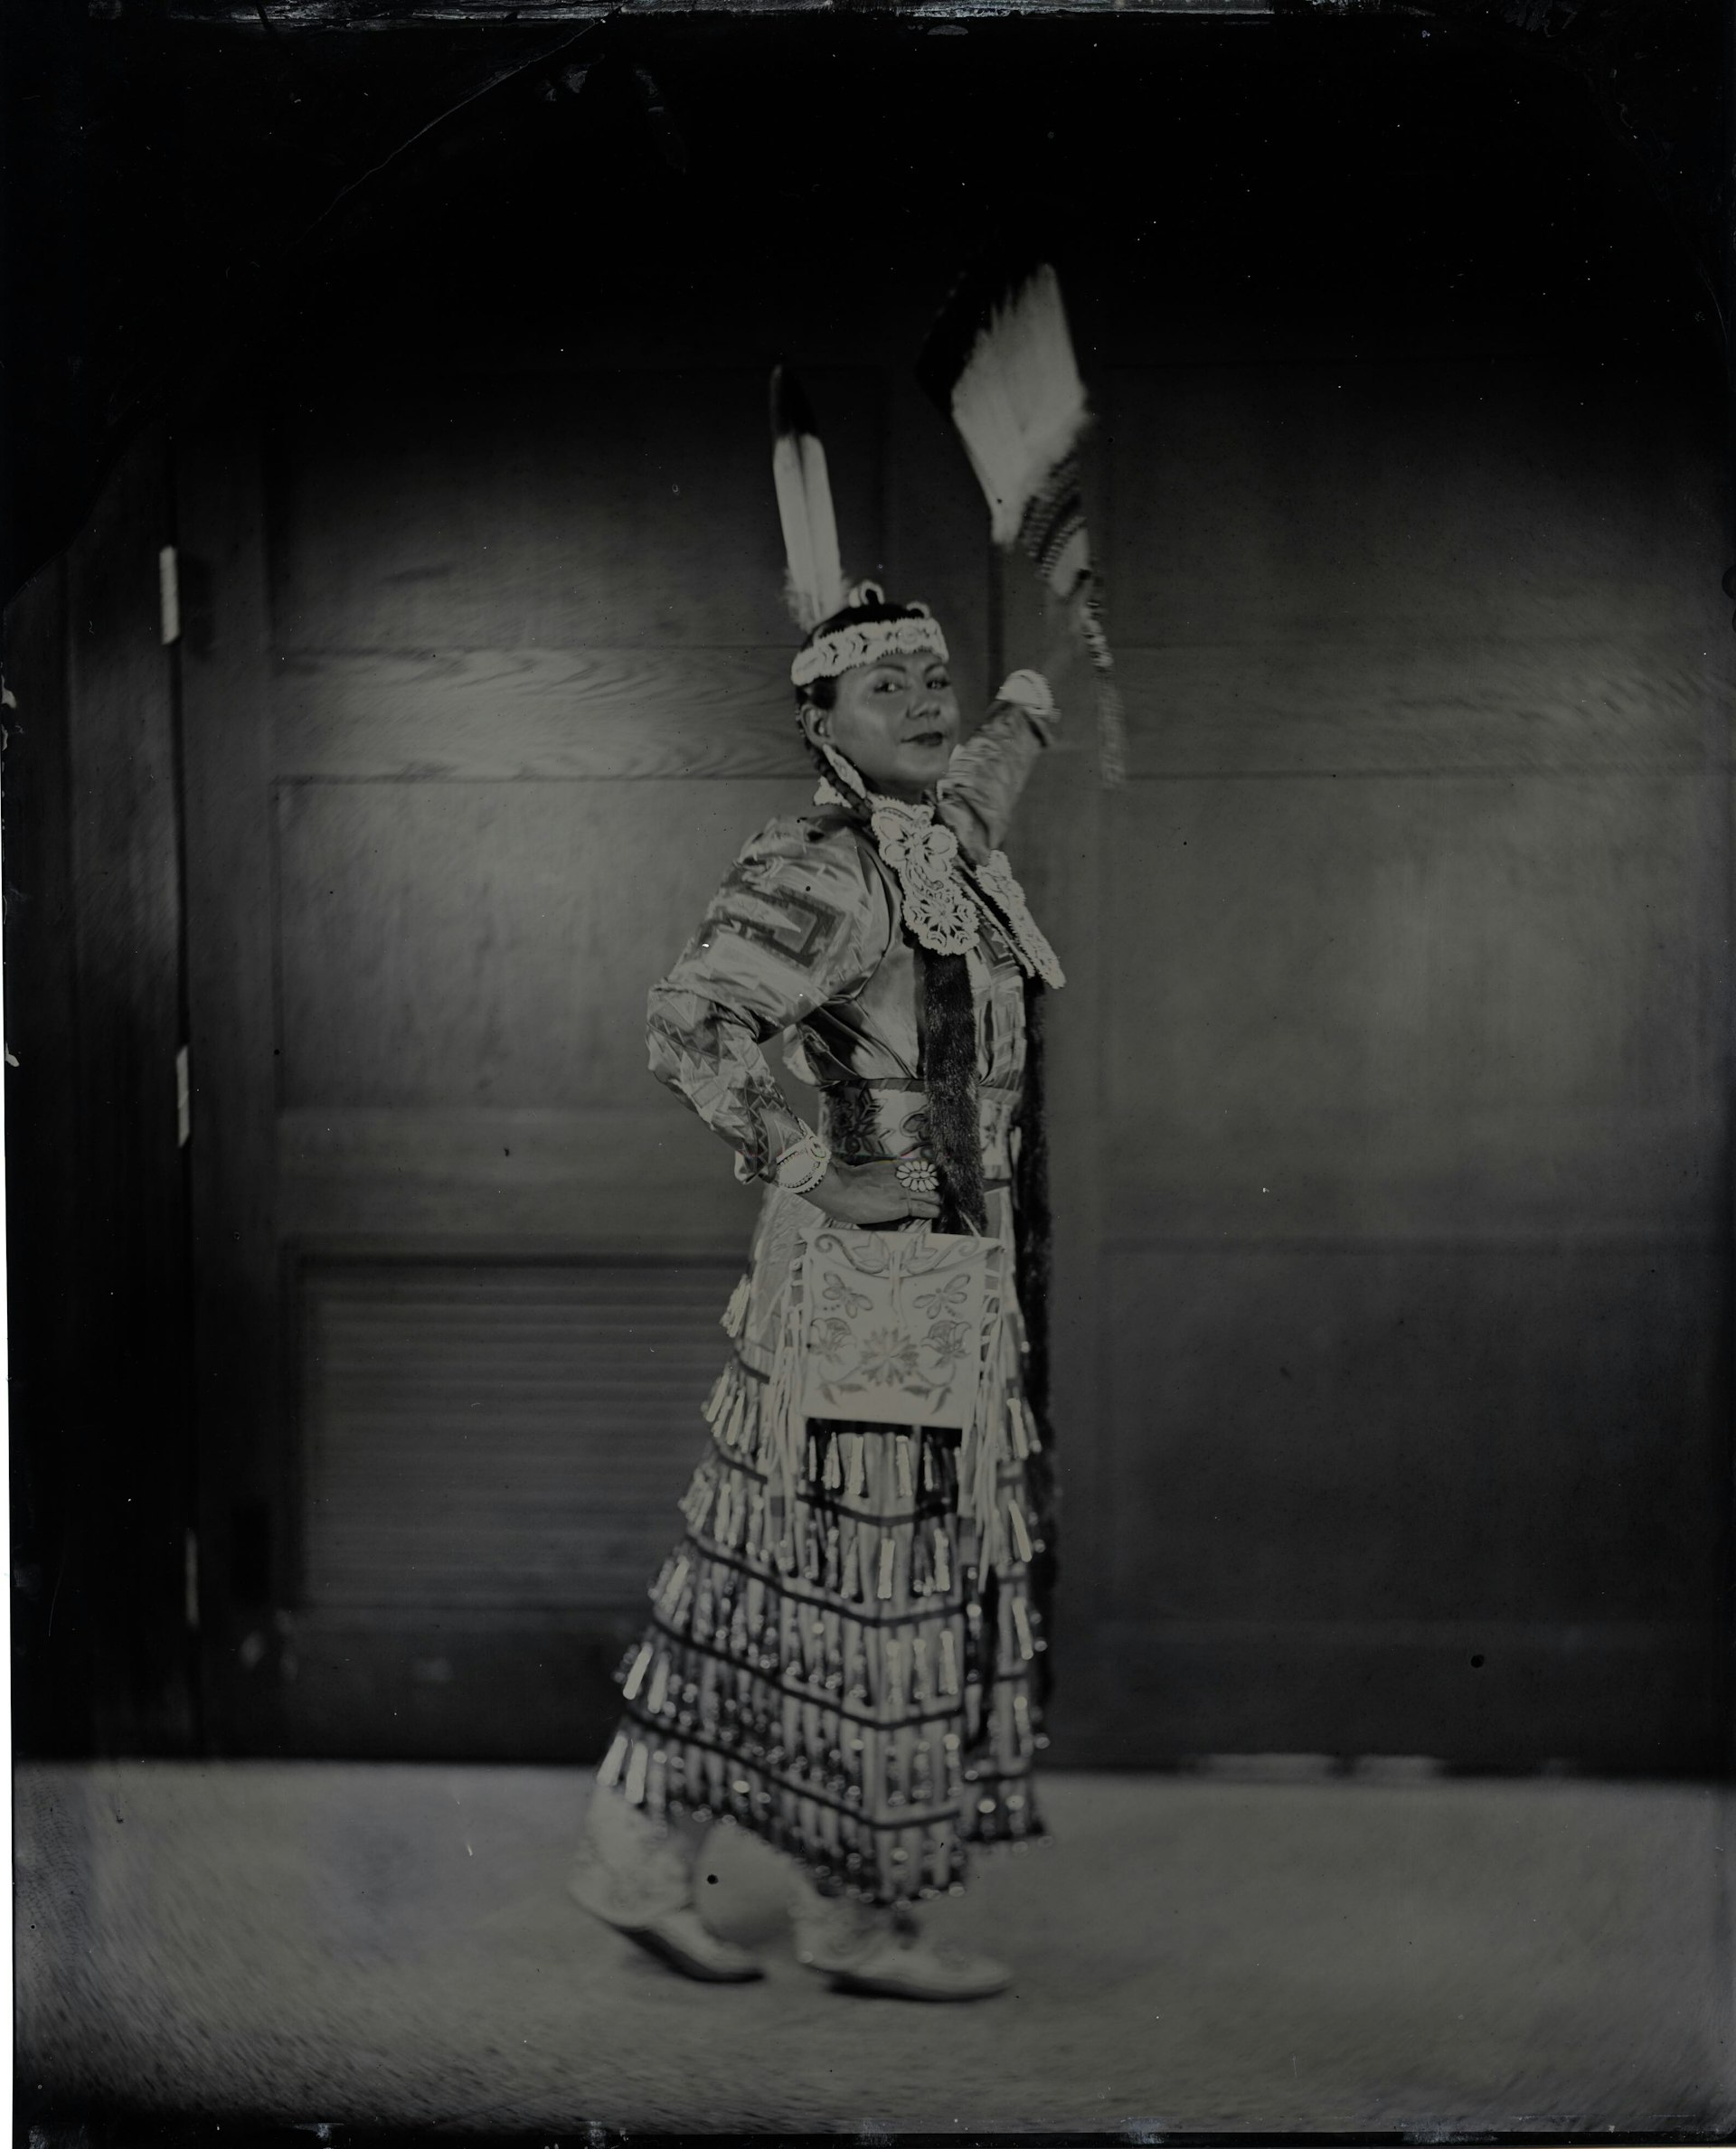 Talking Tintype, Madrienne Salgado, Jingle Dress Dancer/Government and Public Relations Manager for the Muckleshoot Indian Tribe, Citizen of the Muckleshoot Nation, 2017, from the series Critical Indigenous Photographic Exchange, Will Willson.